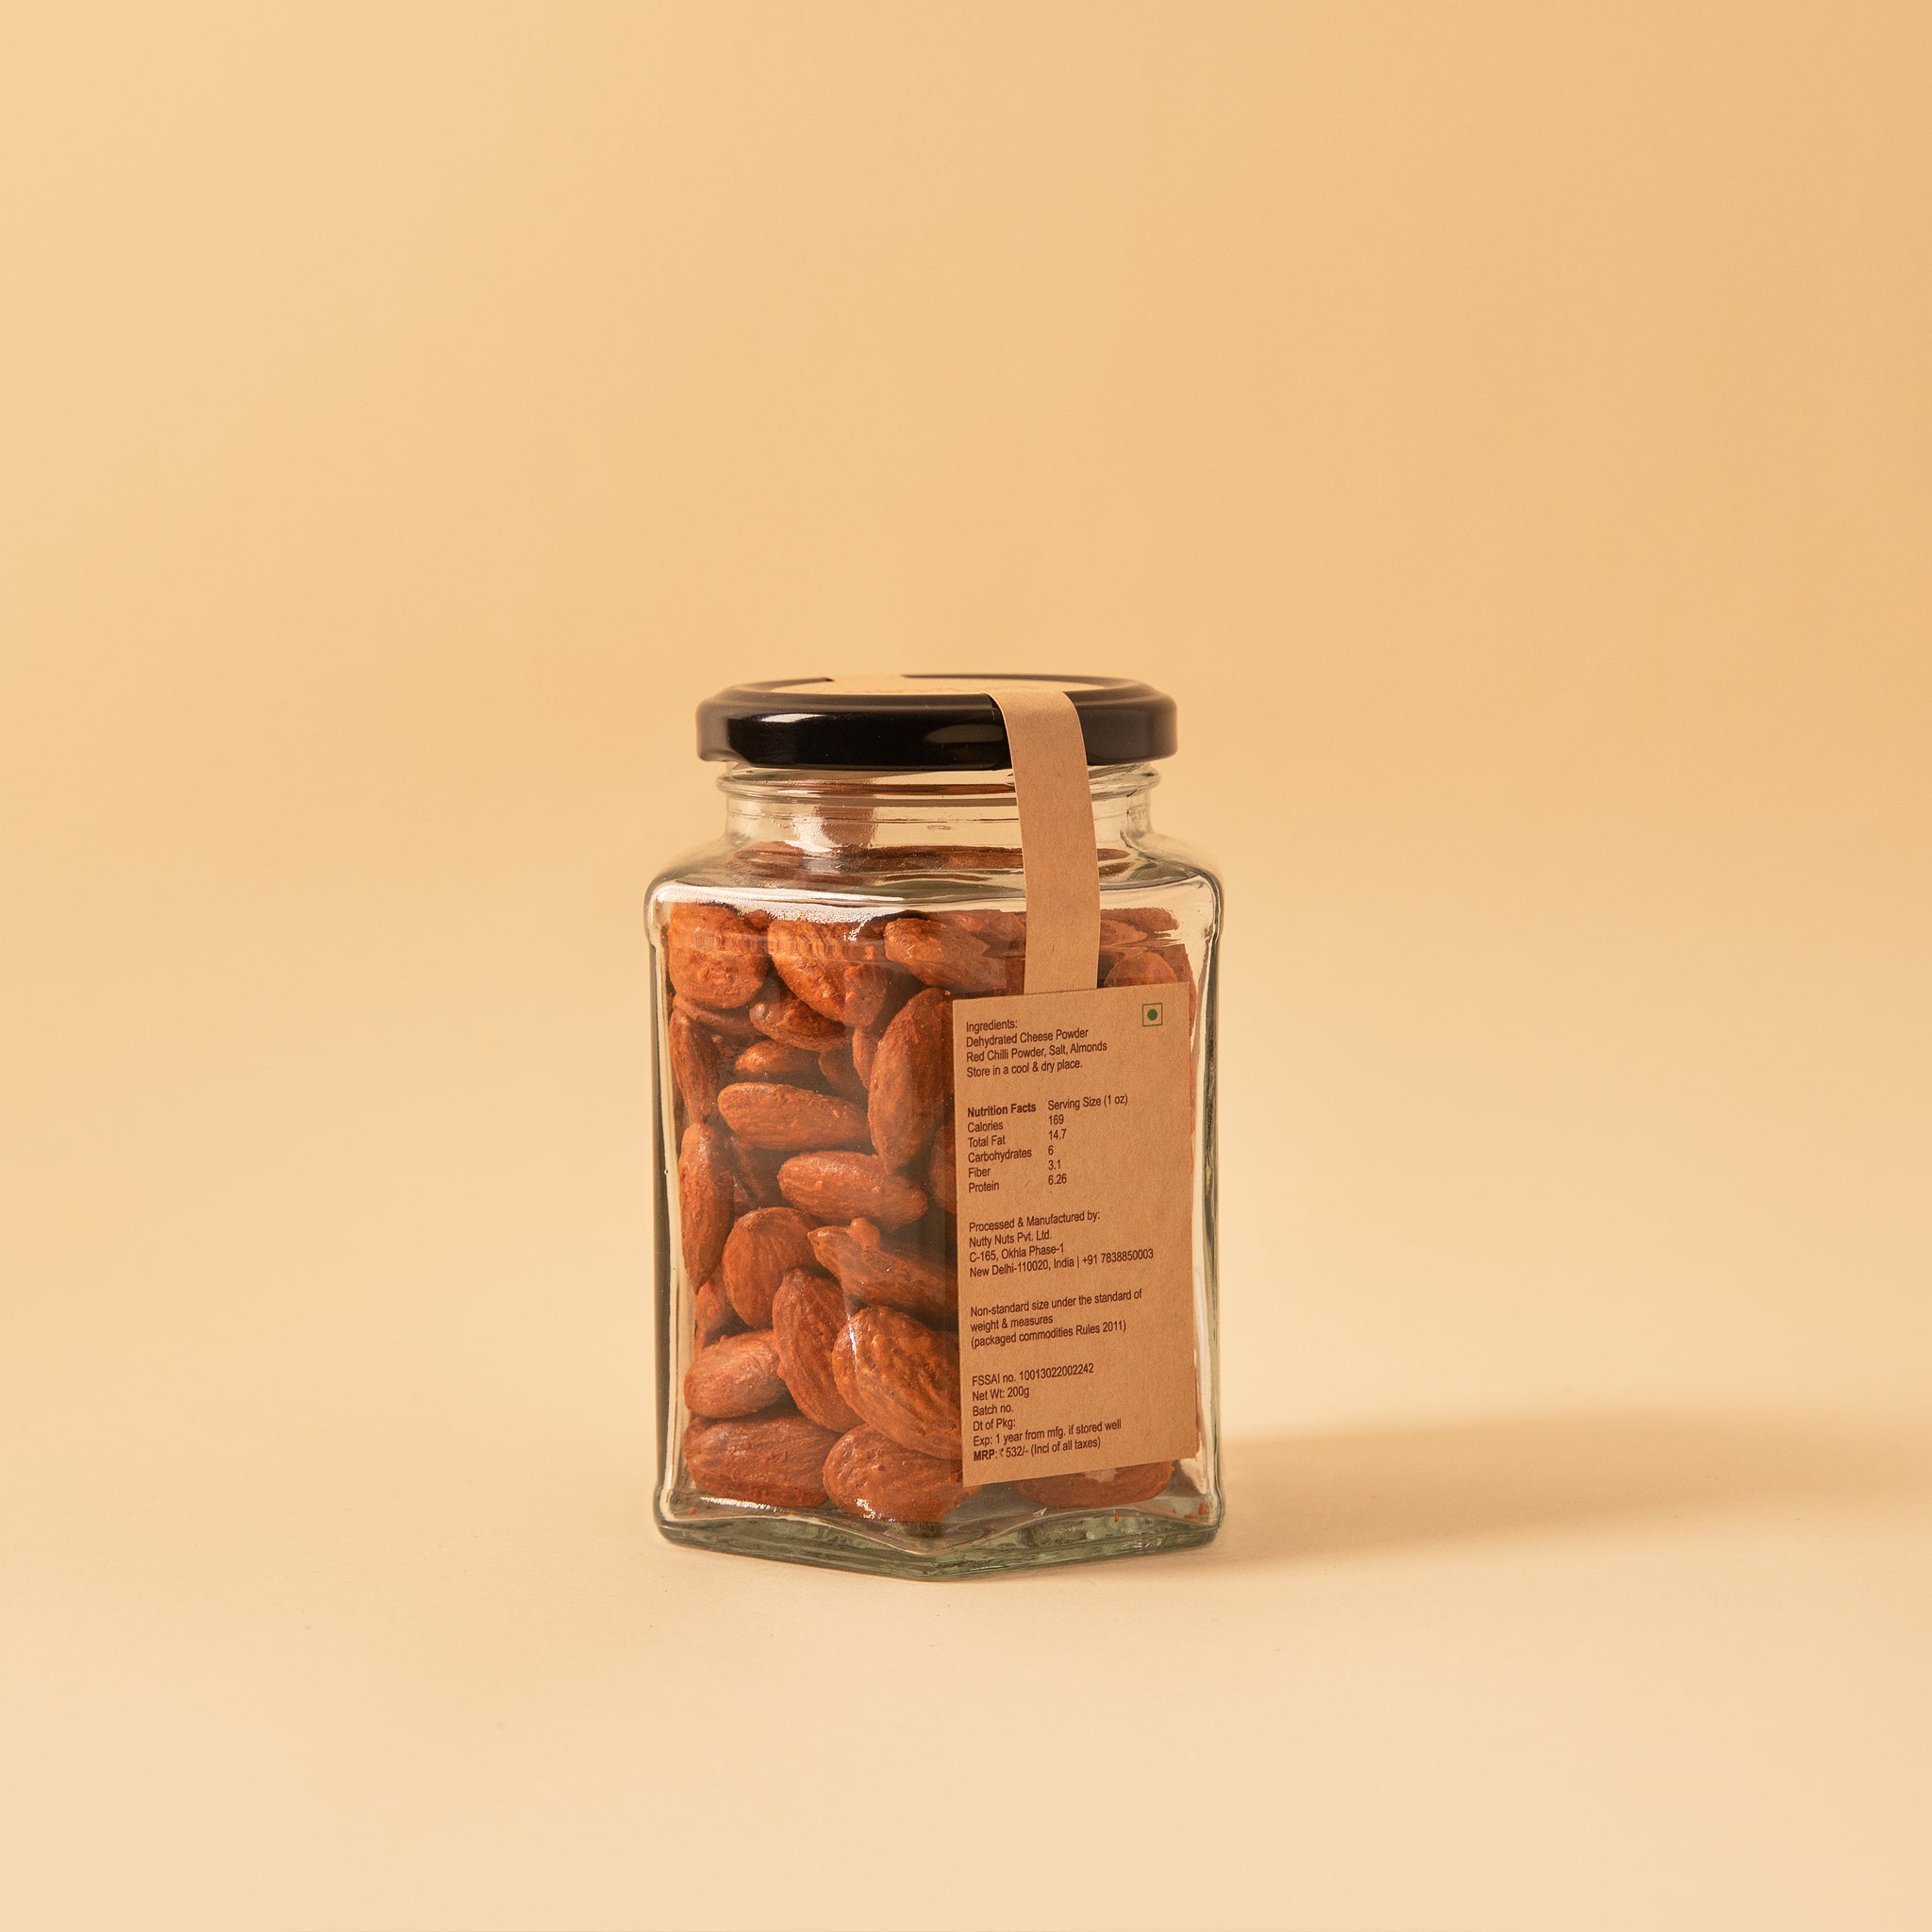 Cheese and Chilli Almonds roasted and delicately flavoured